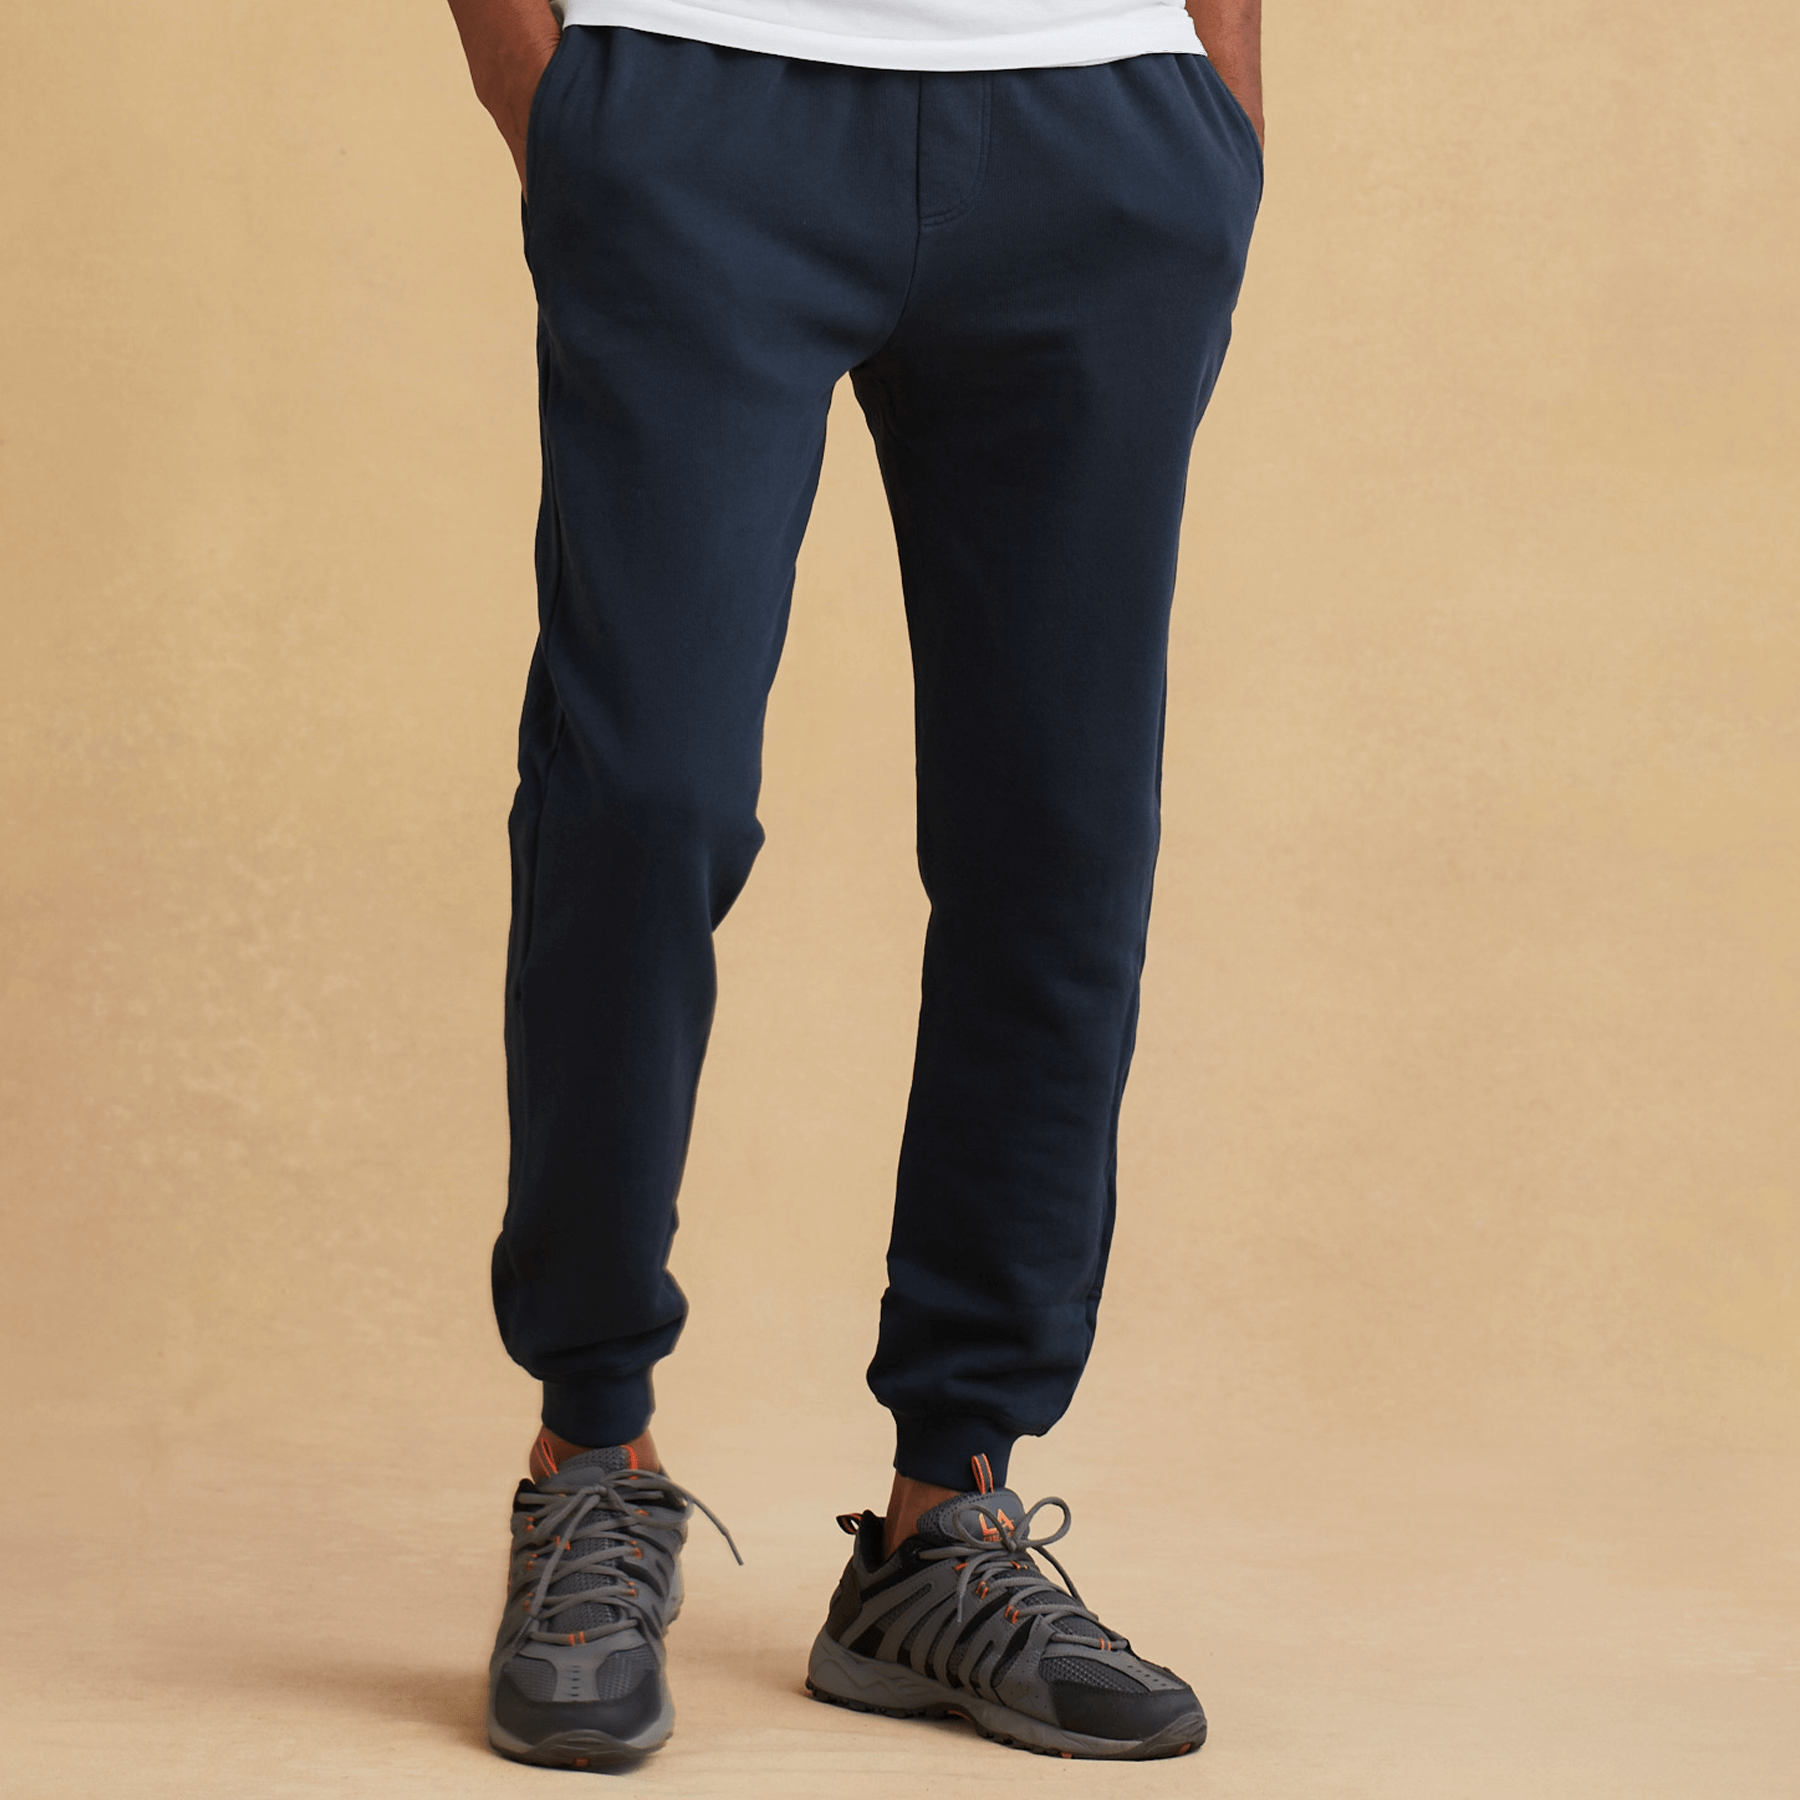 Men's Slim-Fit French Terry Joggers